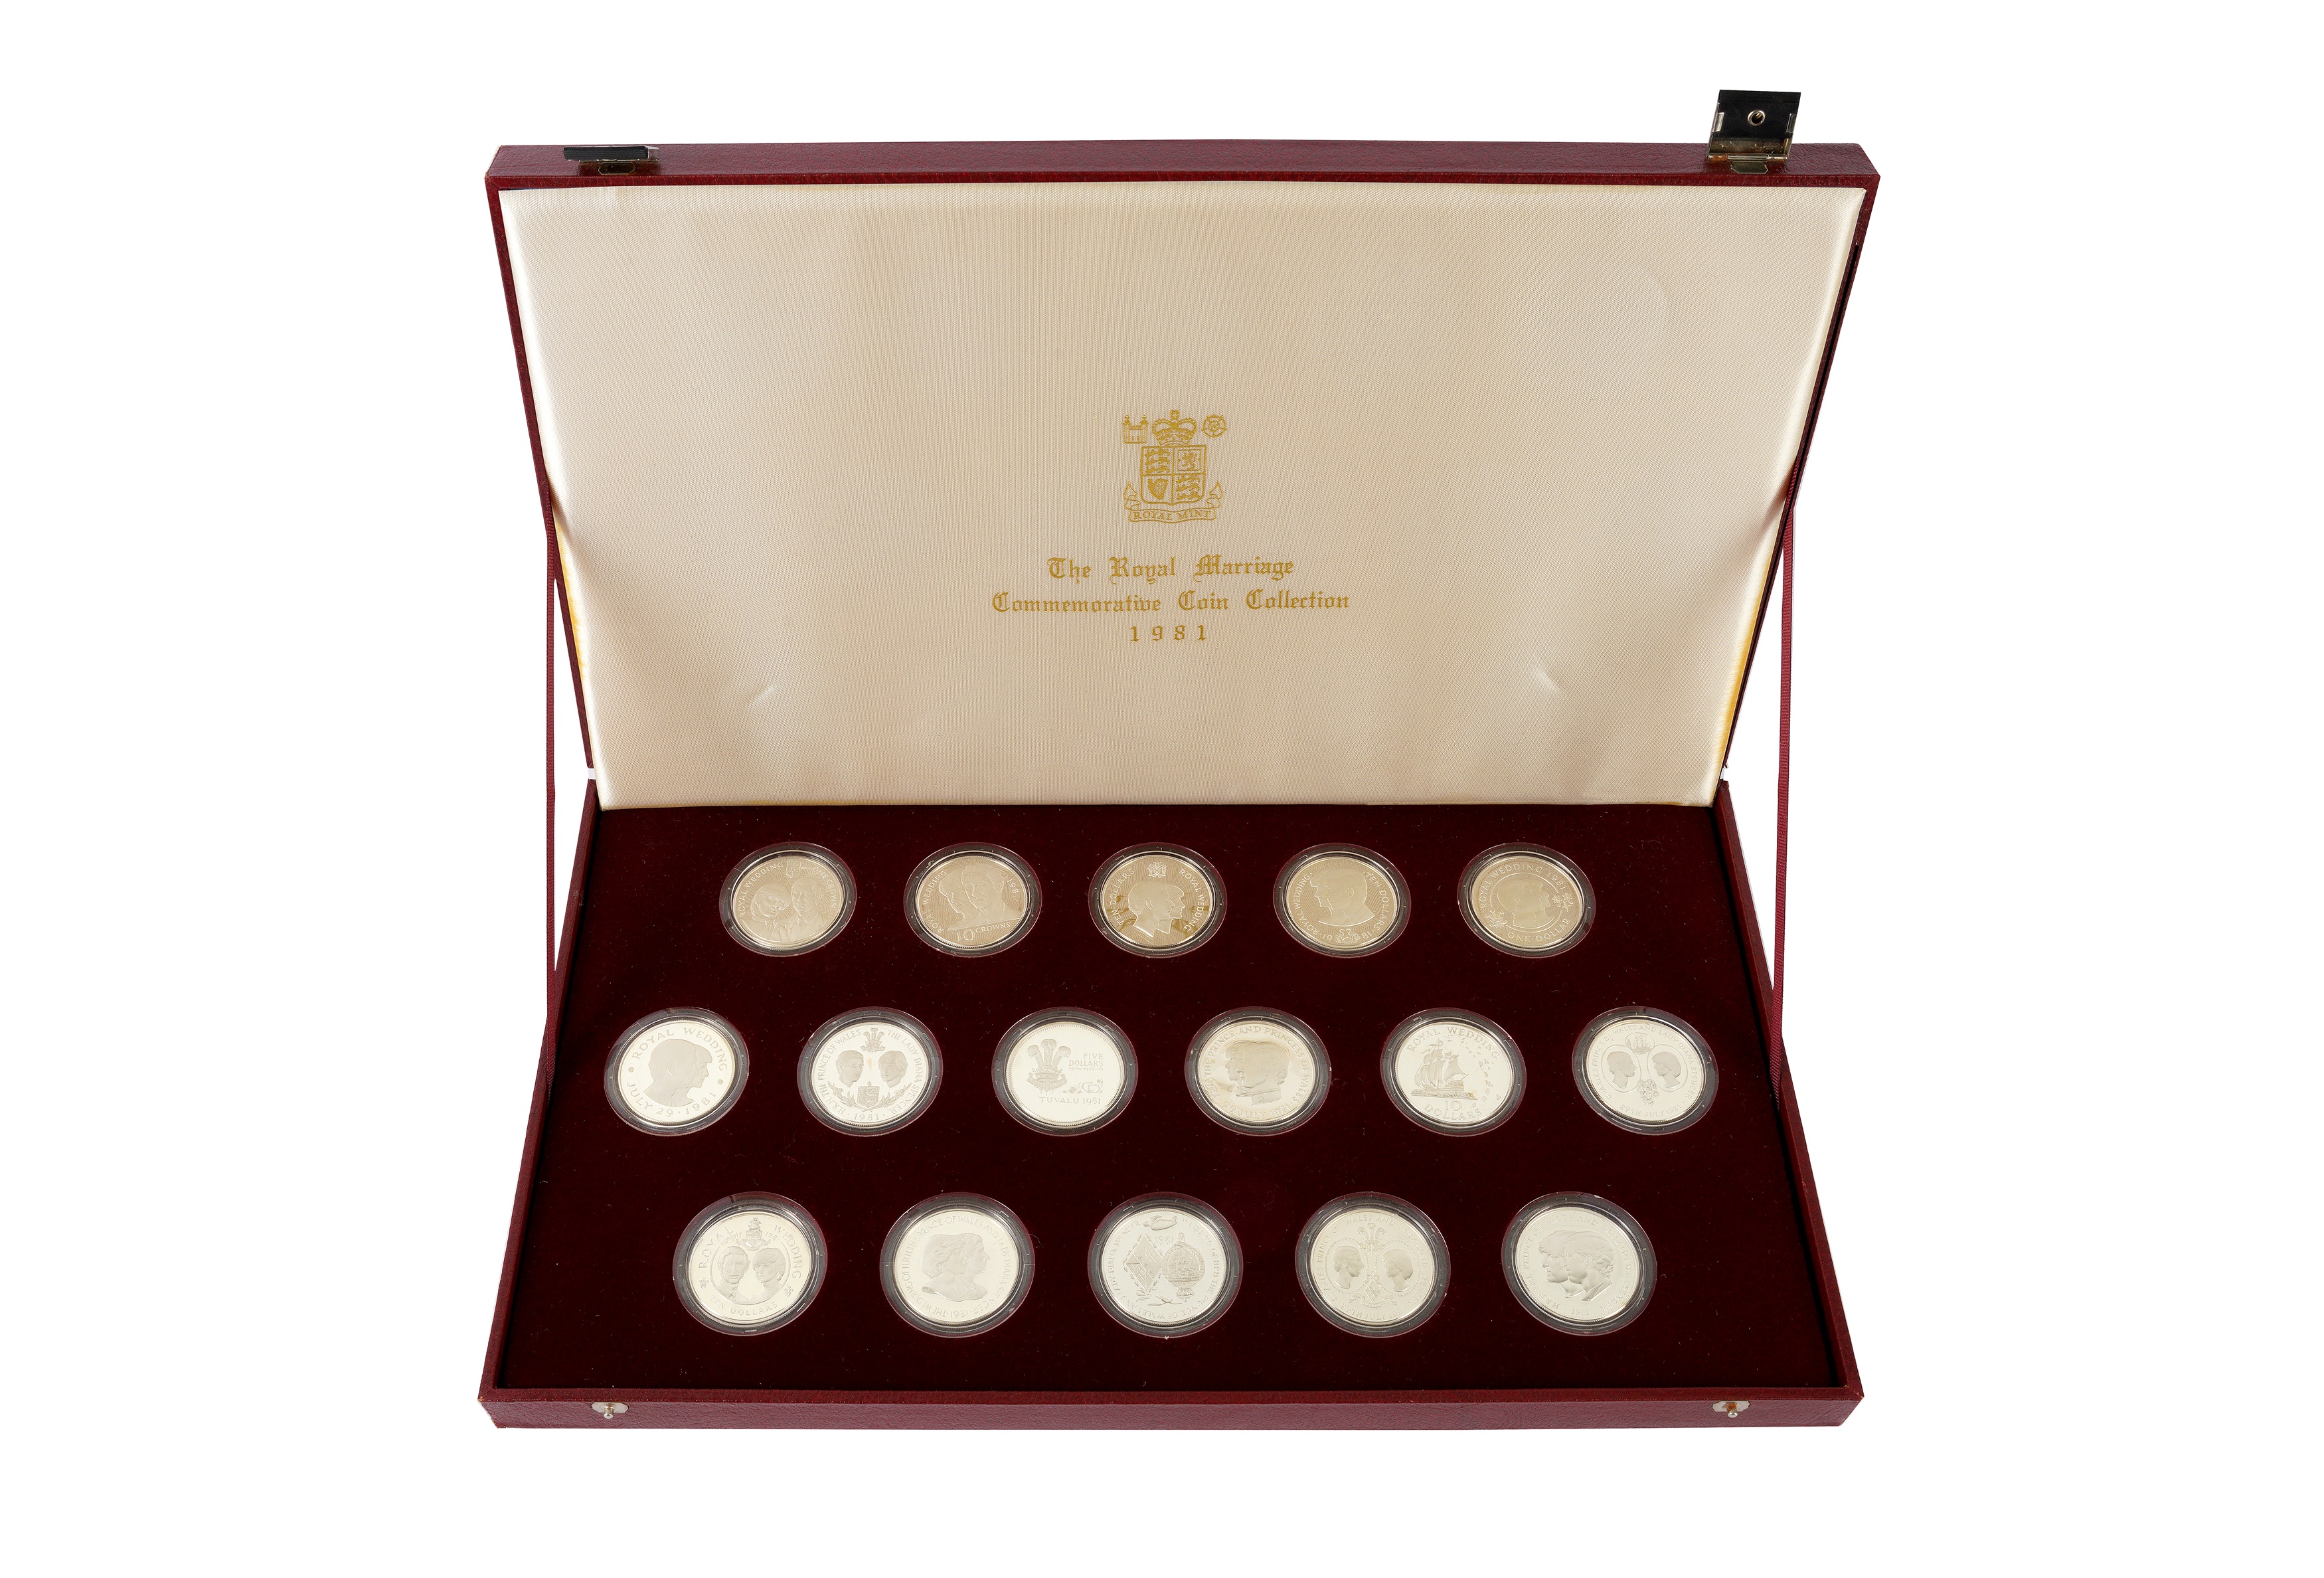 THE ROYAL MARRIAGE COMMEMORATIVE COIN COLLECTION, 1981